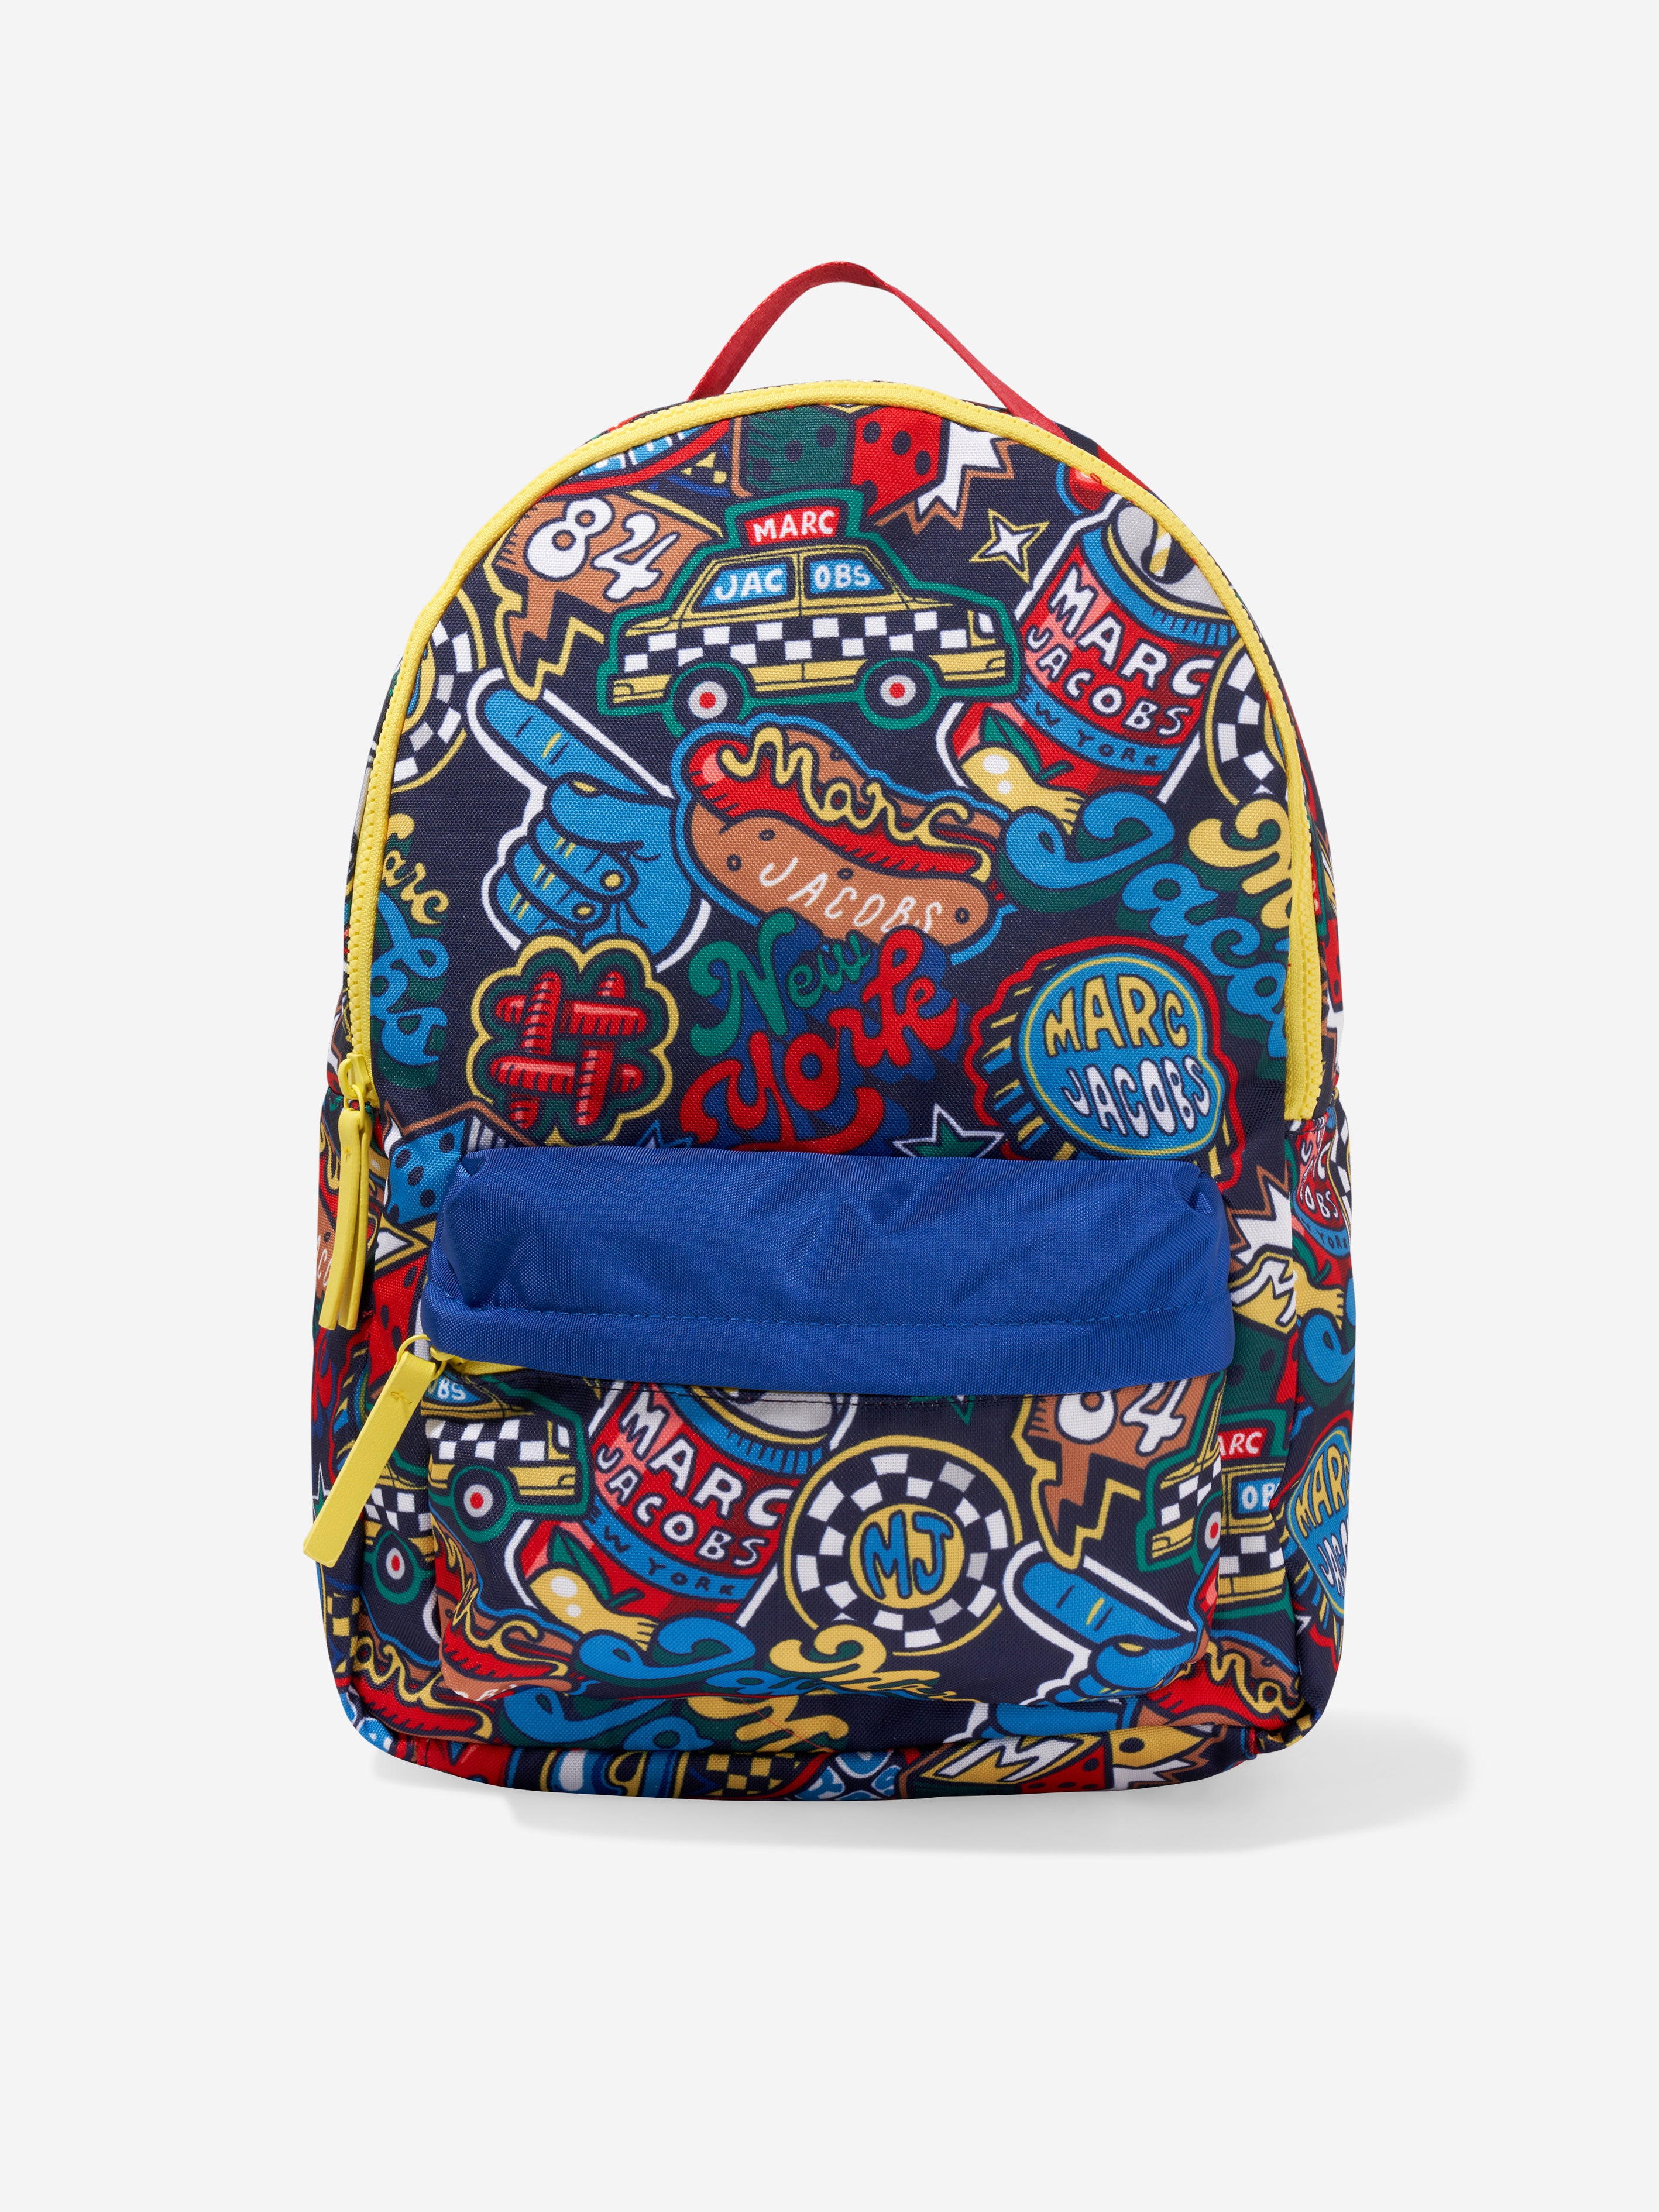 MARC JACOBS Boys Badge Print Backpack in Navy | Childsplay Clothing